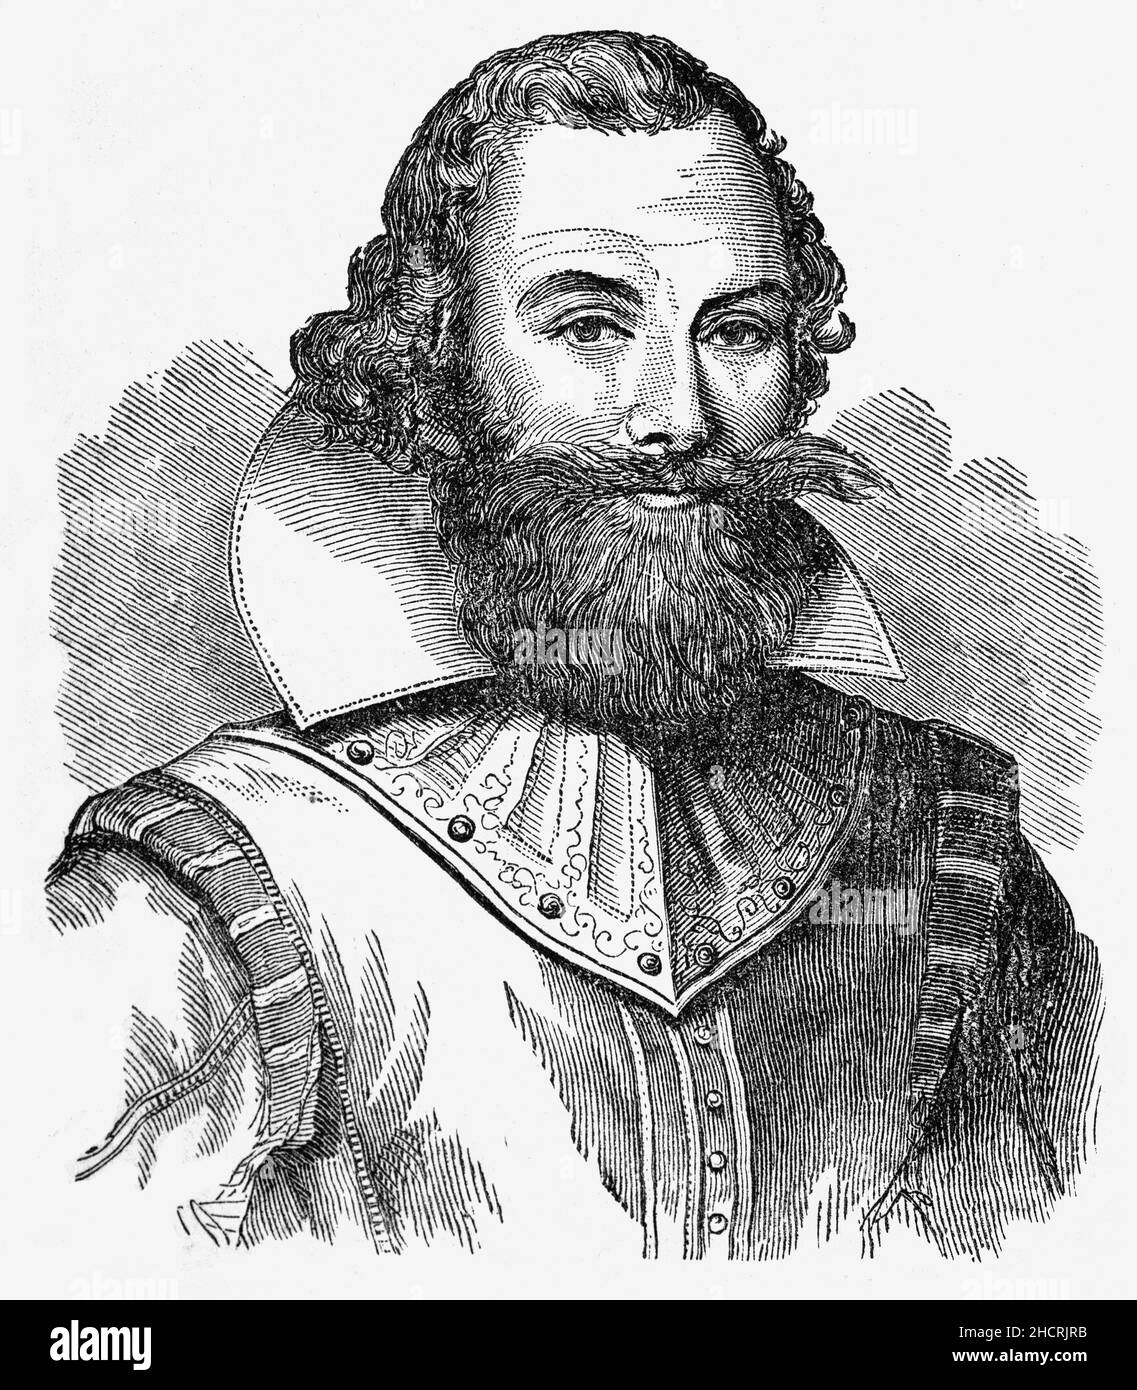 A late 19th Century portrait of Captain John Smith (1580-1631), an English soldier, explorer, colonial governor, Admiral of New England, and author. He played an important role in the establishment of the colony at Jamestown, Virginia, the first permanent English settlement in America, in the early 17th century. He was a leader of the Virginia Colony between September 1608 and August 1609, and he led an exploration along the rivers of Virginia and the Chesapeake Bay, during which he became the first English explorer to map the Chesapeake Bay area. Later, he explored and mapped the coast of New Stock Photo